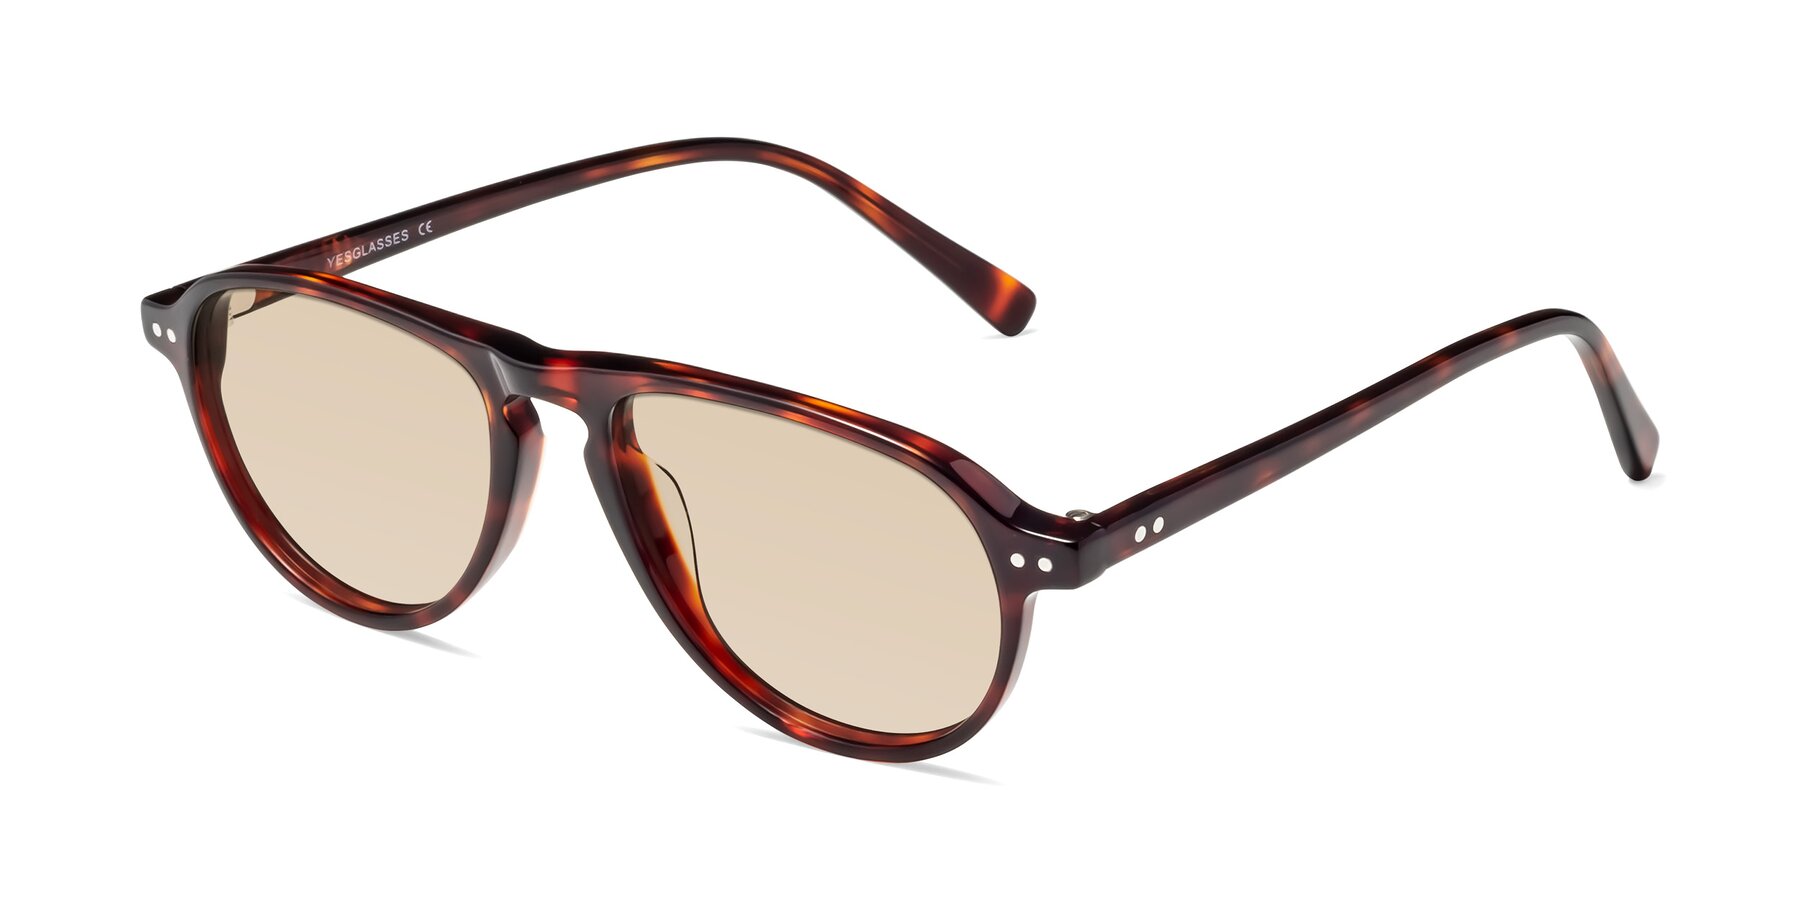 Angle of 17544 in Burgundy Tortoise with Light Brown Tinted Lenses